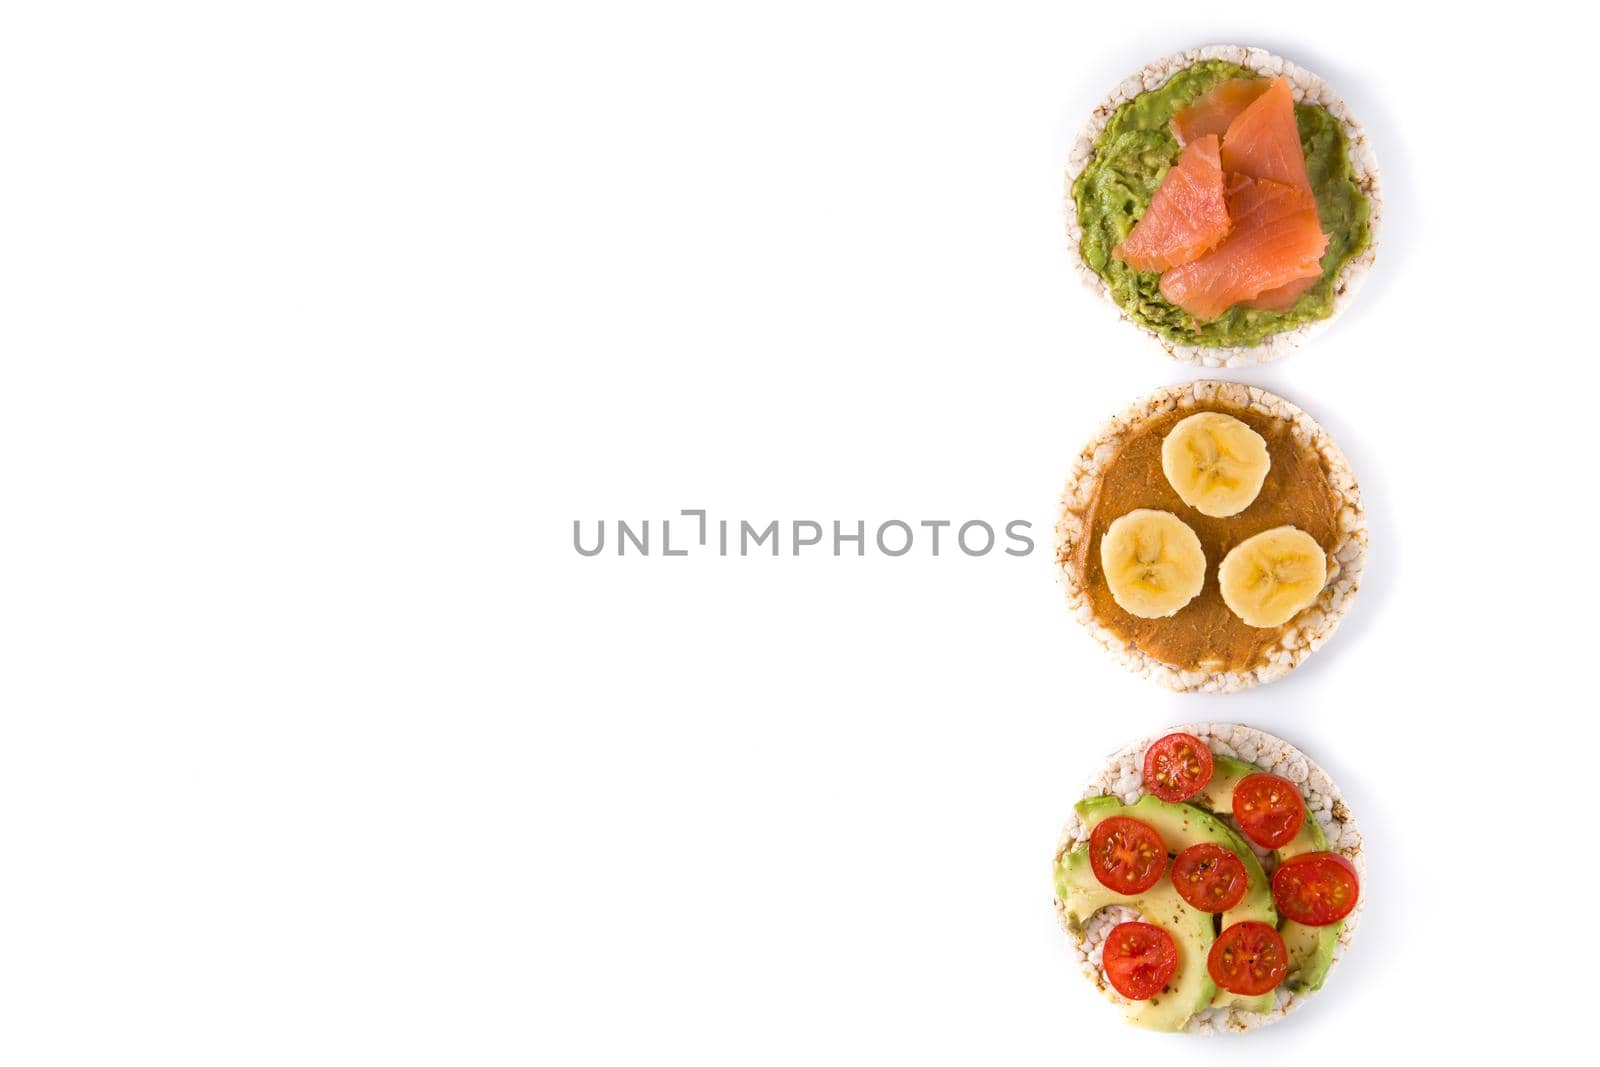 Puffed rice cakes with guacamole salmon,tomato and avocado, and banana with peanut butter isolated on white background